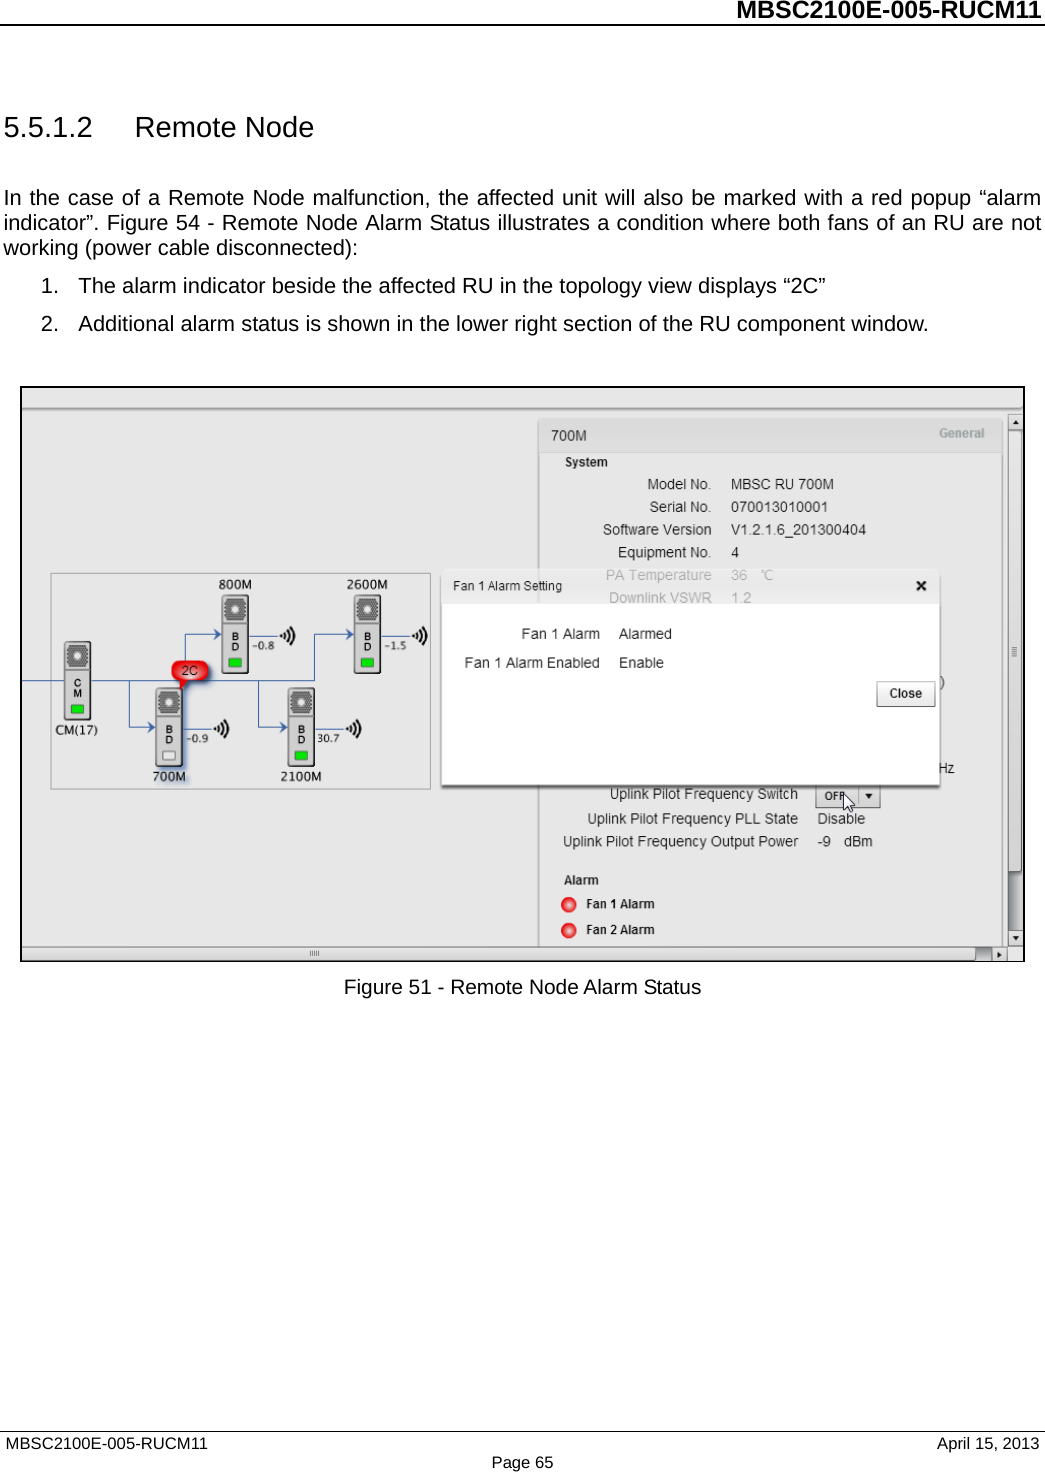          MBSC2100E-005-RUCM11   5.5.1.2 Remote Node In the case of a Remote Node malfunction, the affected unit will also be marked with a red popup “alarm indicator”. Figure 54 - Remote Node Alarm Status illustrates a condition where both fans of an RU are not working (power cable disconnected): 1. The alarm indicator beside the affected RU in the topology view displays “2C”   2. Additional alarm status is shown in the lower right section of the RU component window.     Figure 51 - Remote Node Alarm Status MBSC2100E-005-RUCM11                                April 15, 2013 Page 65 